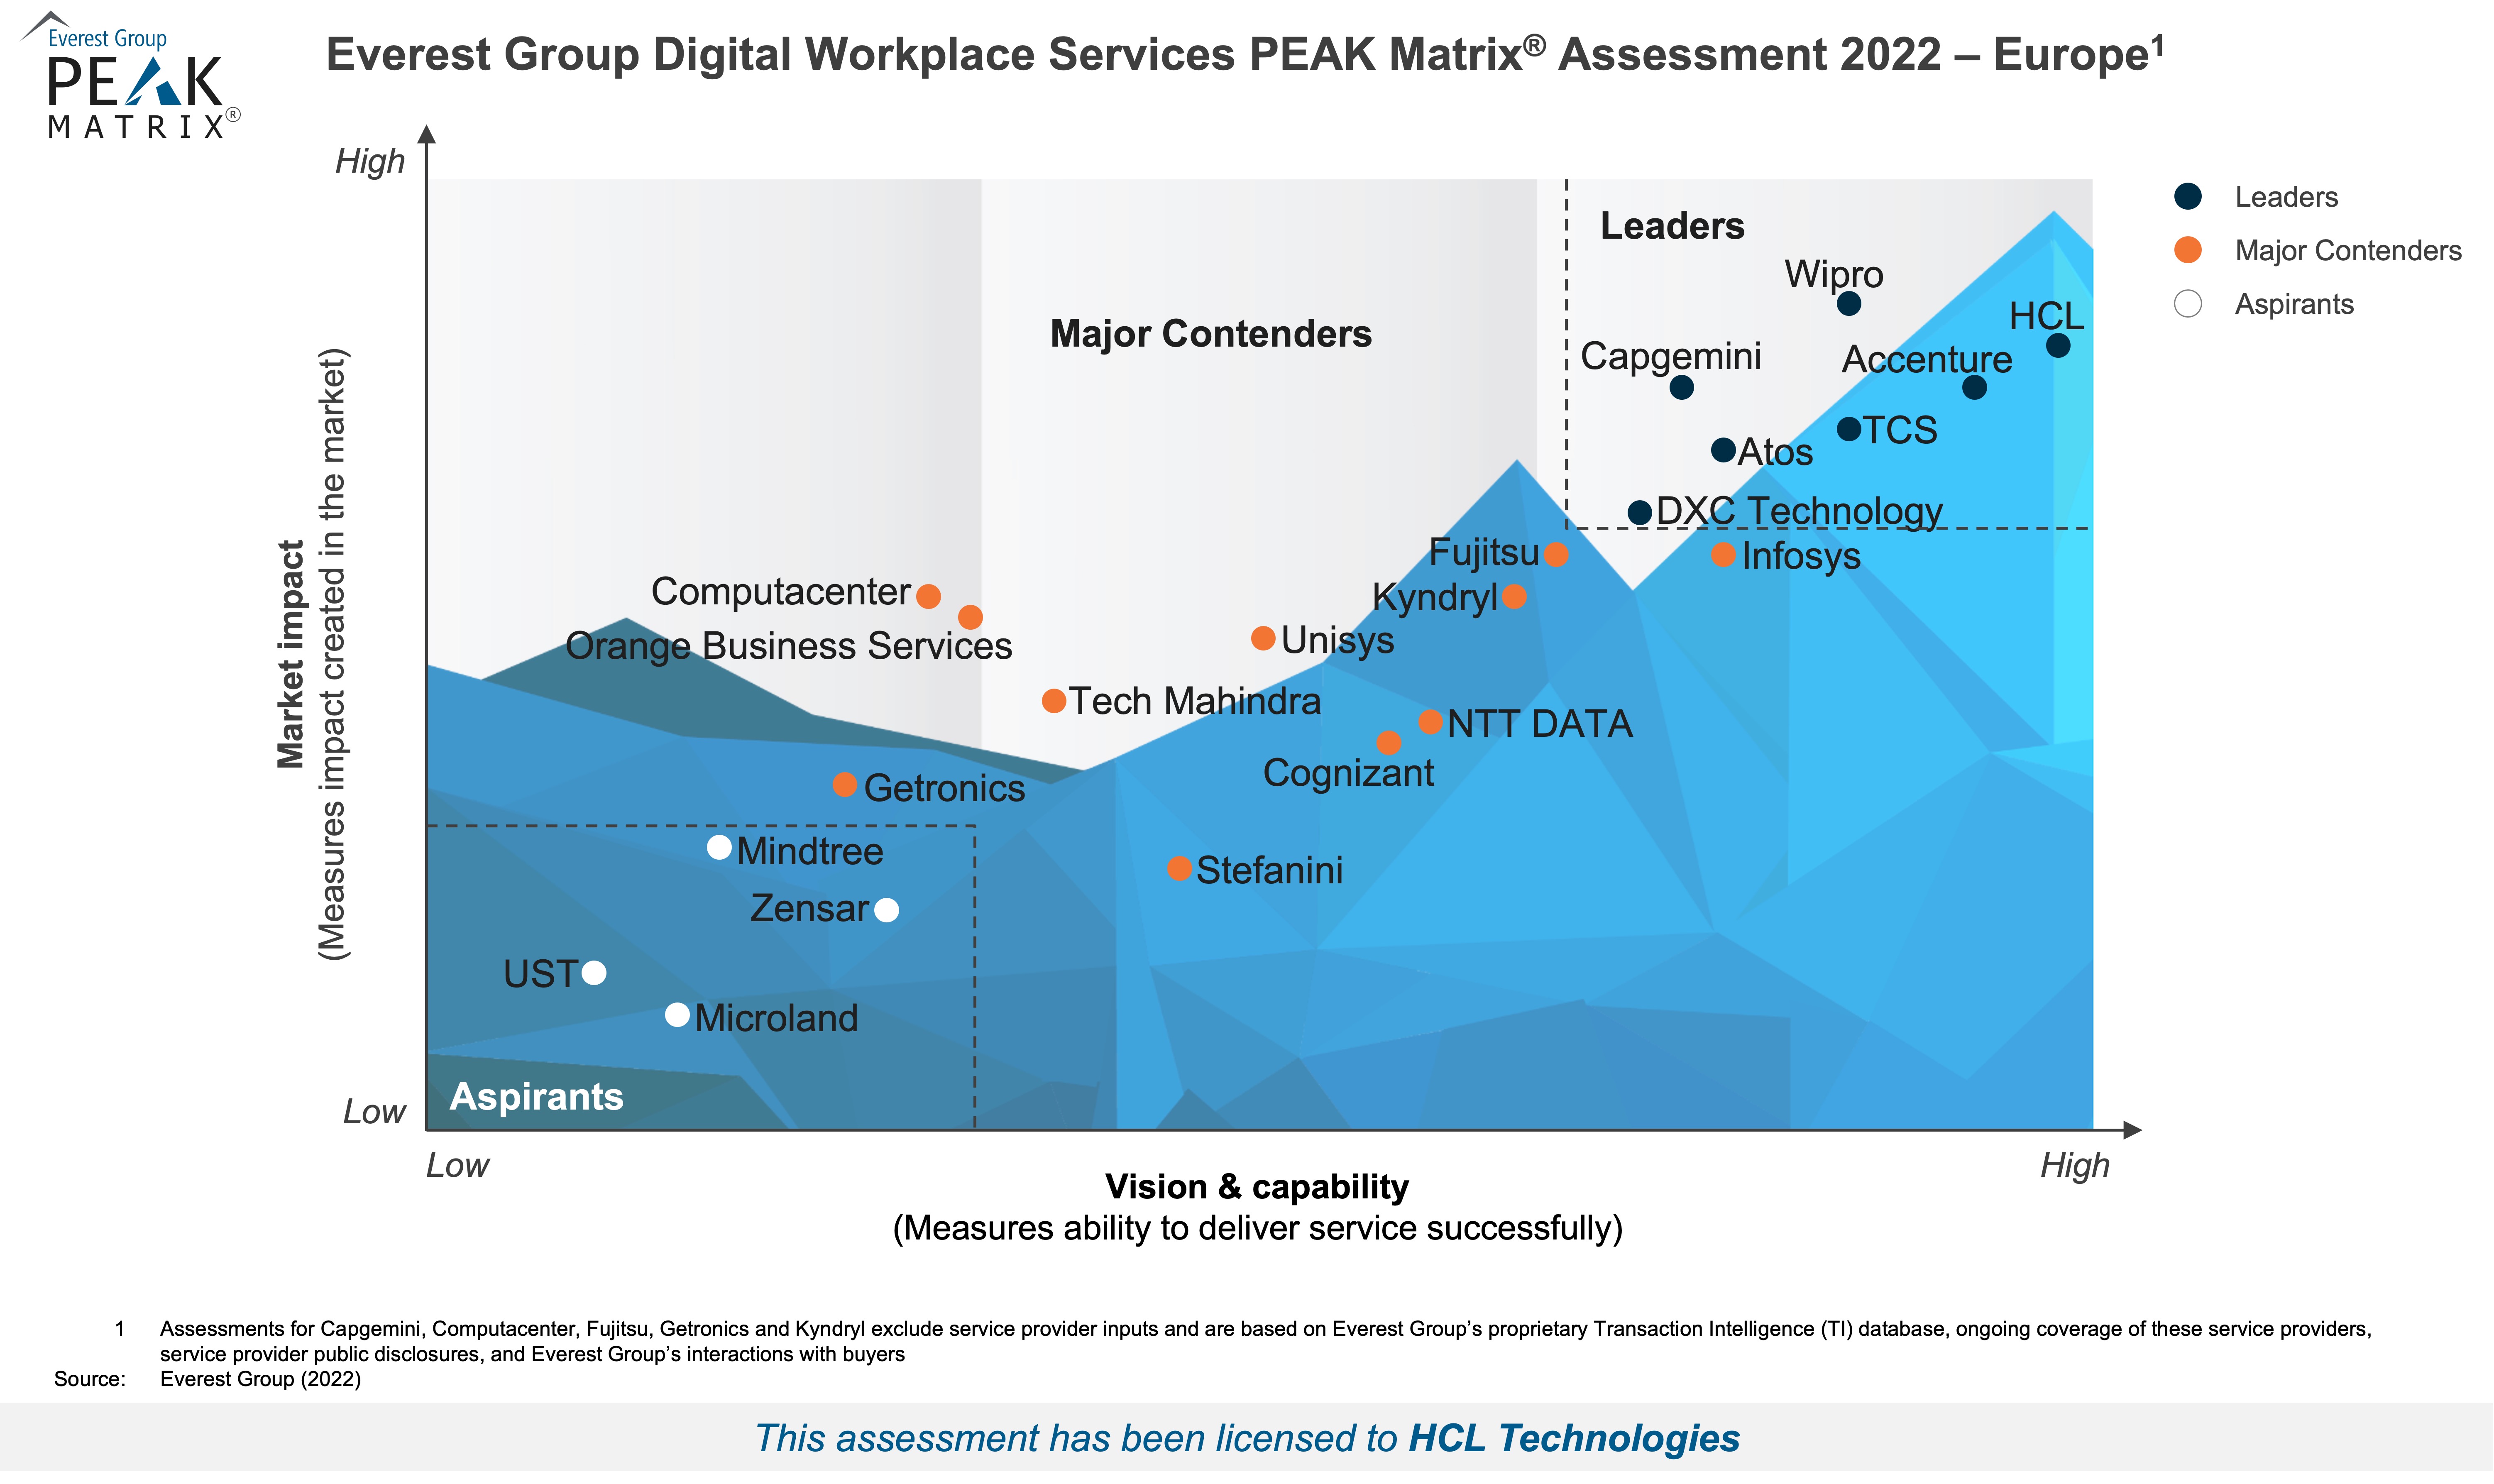 Digital Workplace Services Provider 2022 – Europe